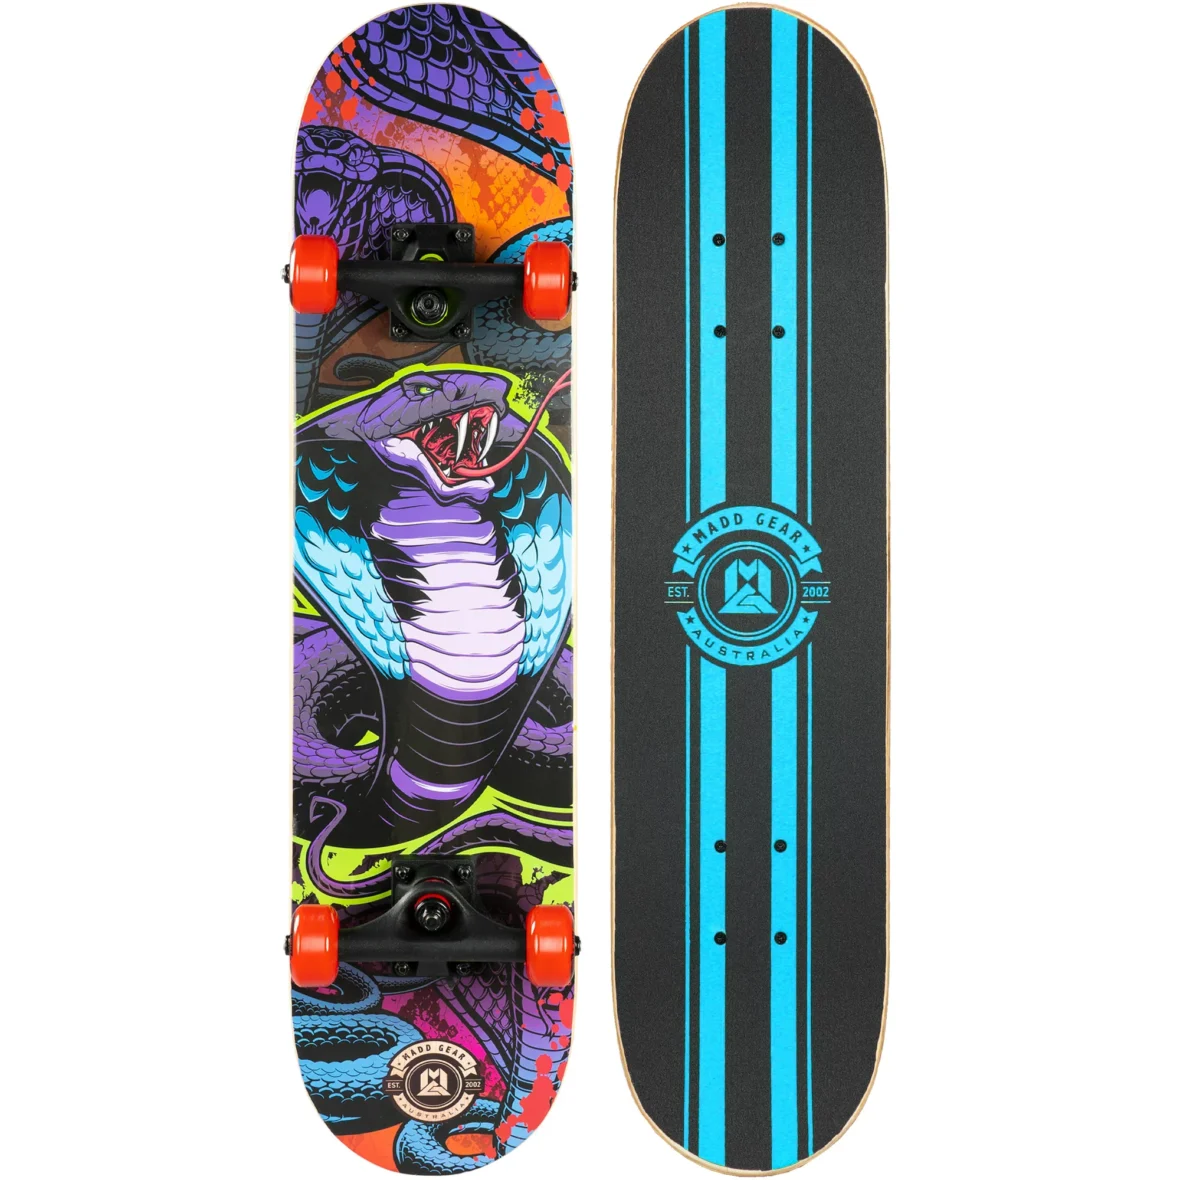 Madd Gear 31 x 7 Inch Double Kicktail Beginner Complete Skateboard with Maple Deck – Viper